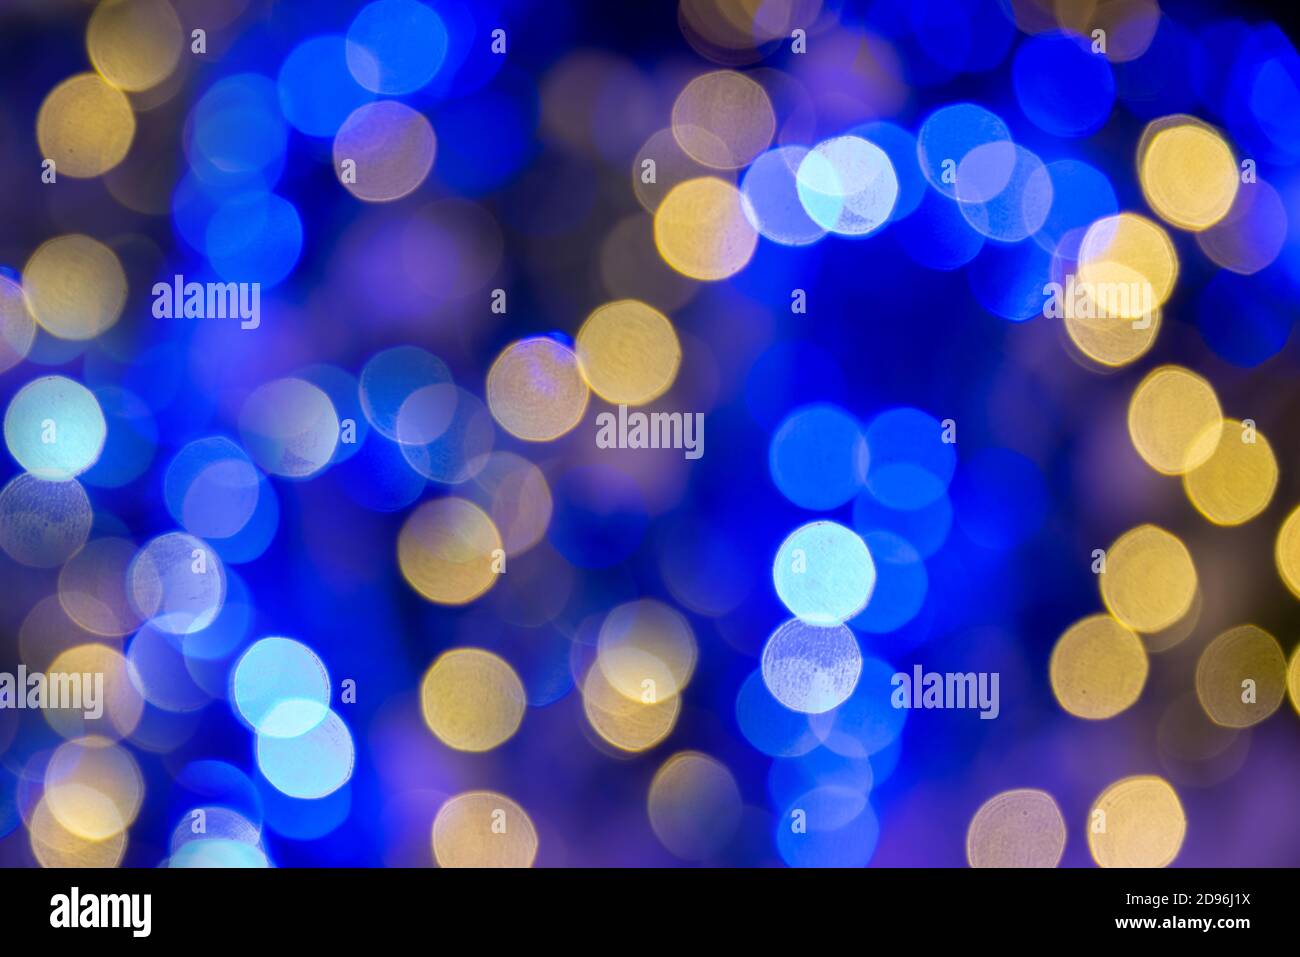 Blue and gold bokeh holidays lights at night, christmas and new year party background Stock Photo